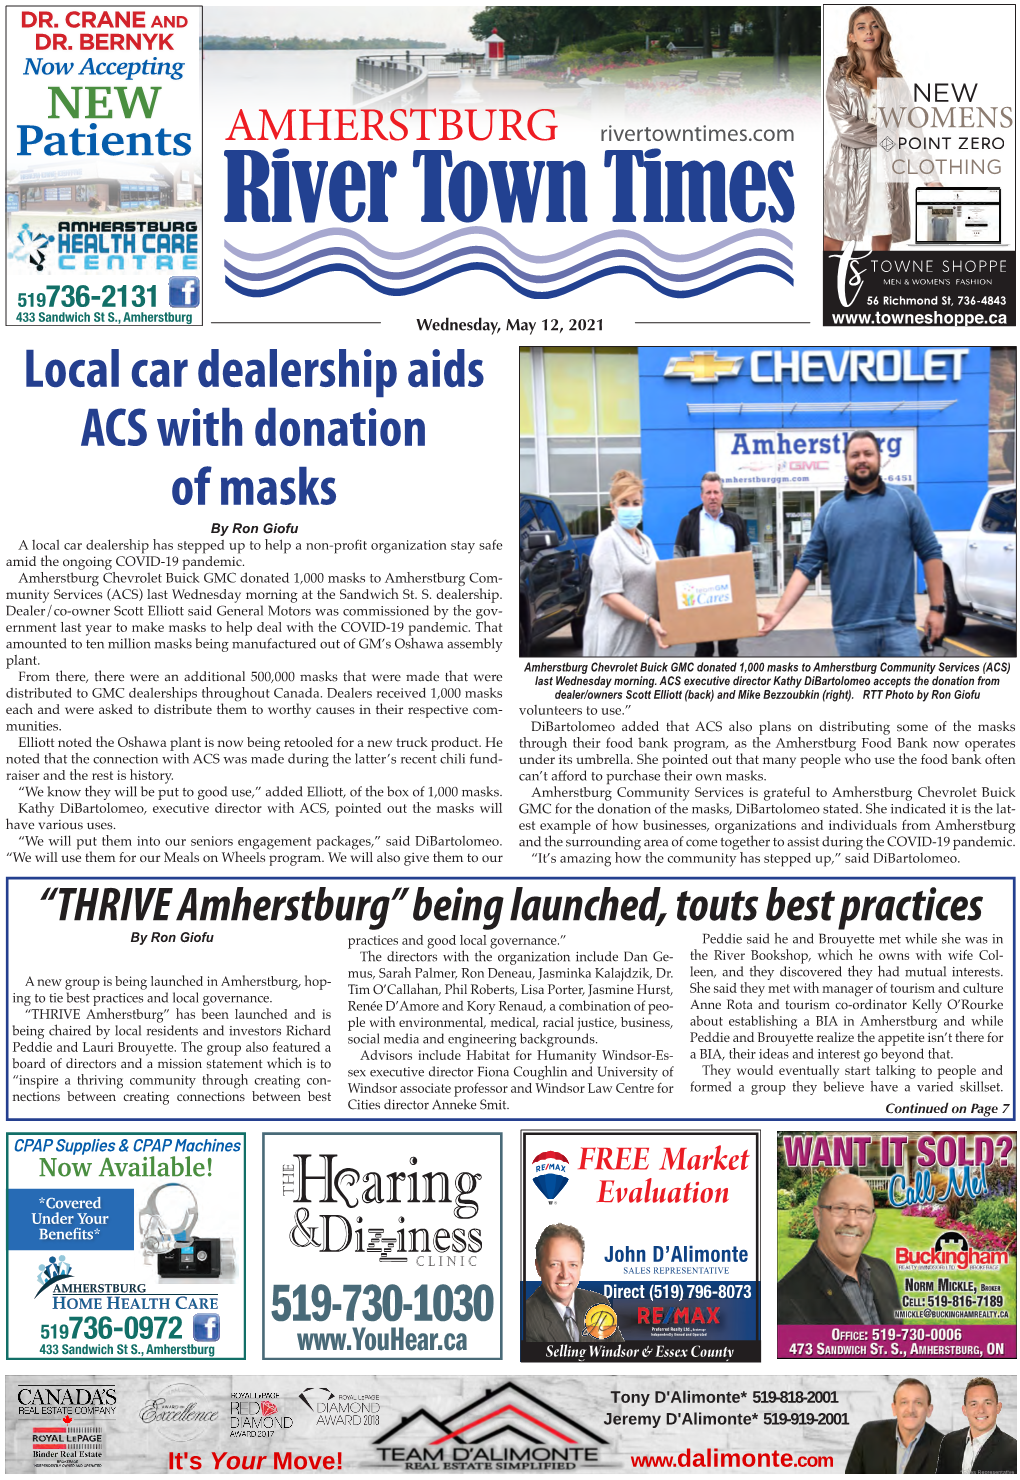 Local Car Dealership Aids ACS with Donation Of